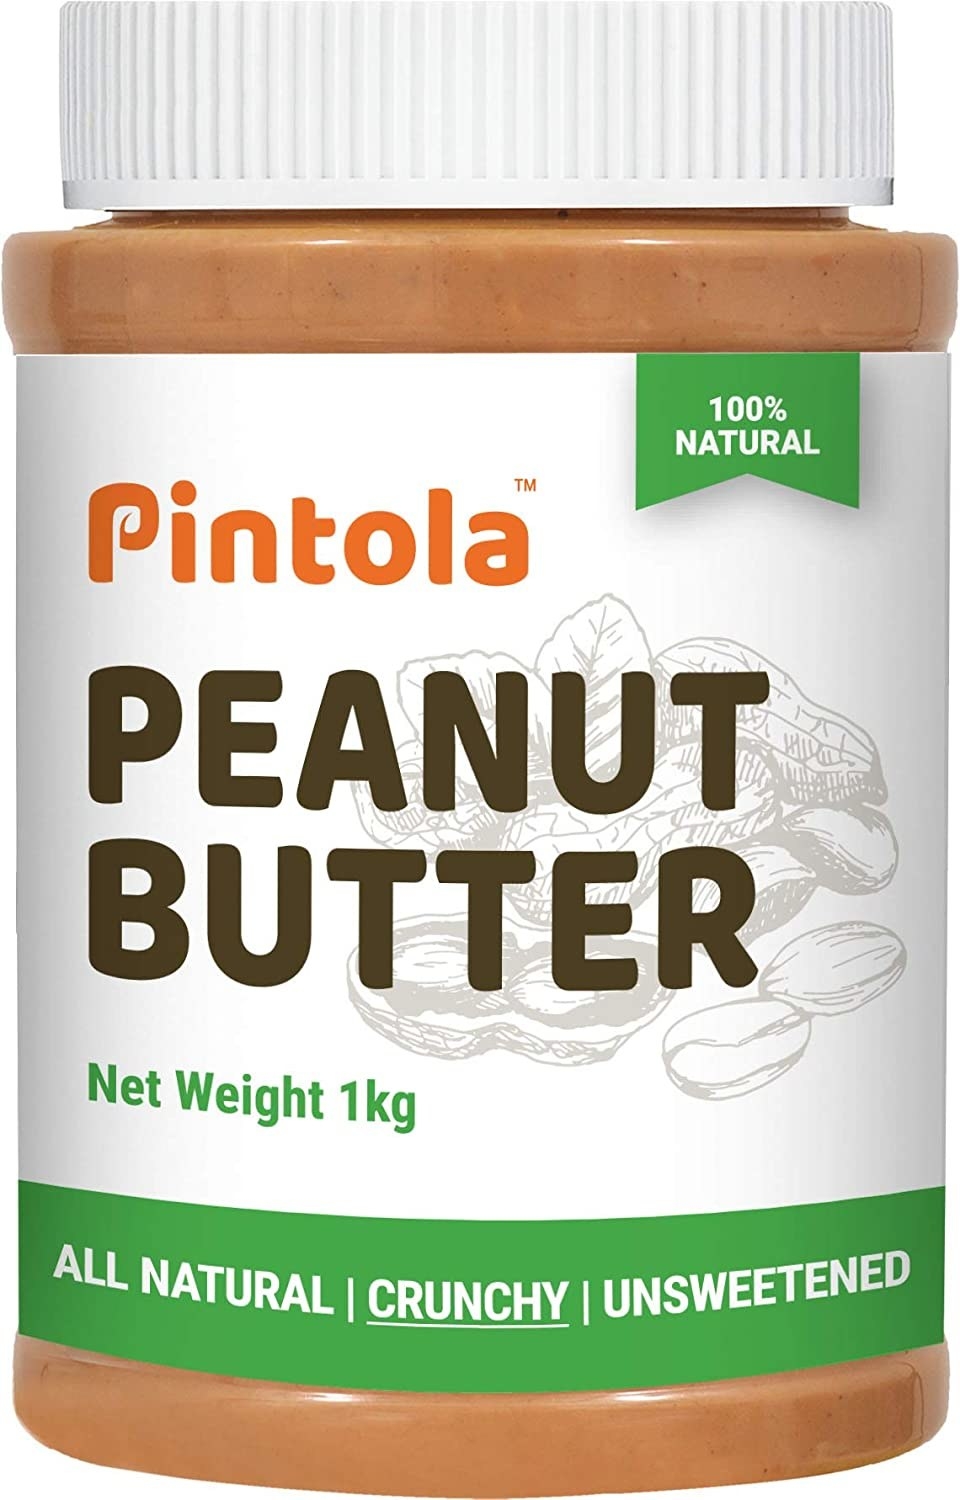 Packaging of the peanut butter 